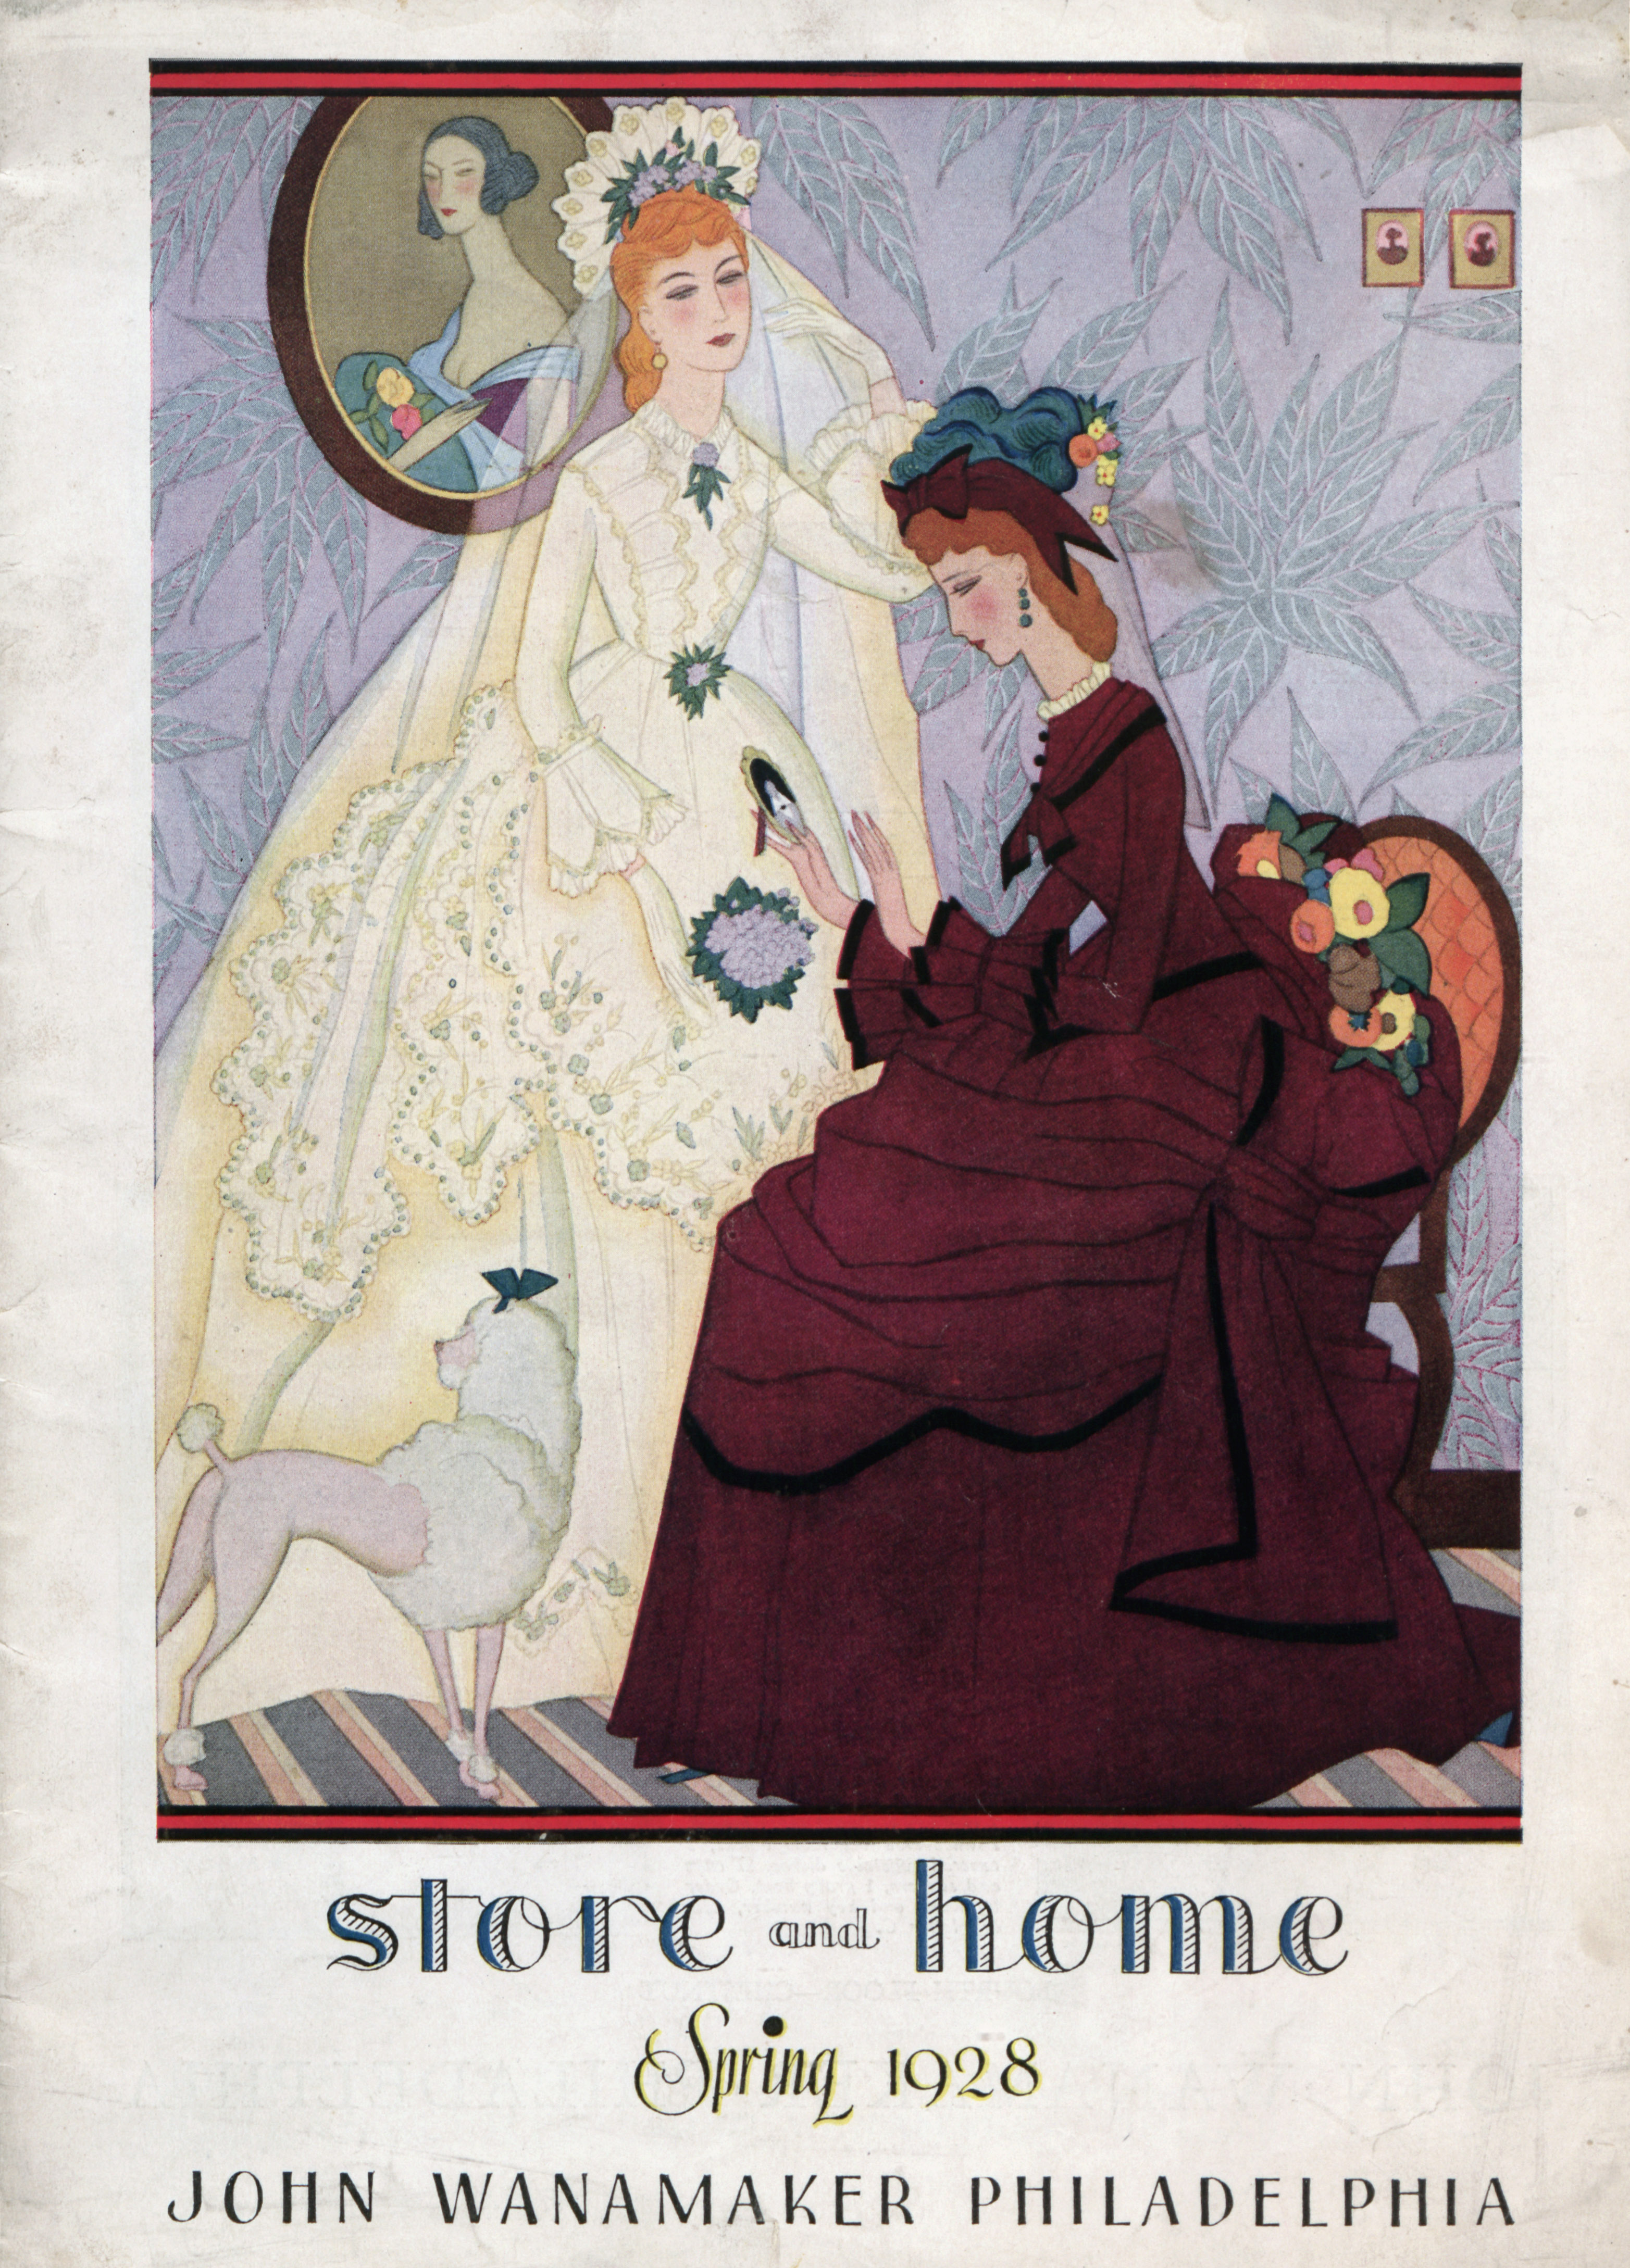 Catalog cover featuring a color illustration of two women in dresses - one appears to be a wedding dress.